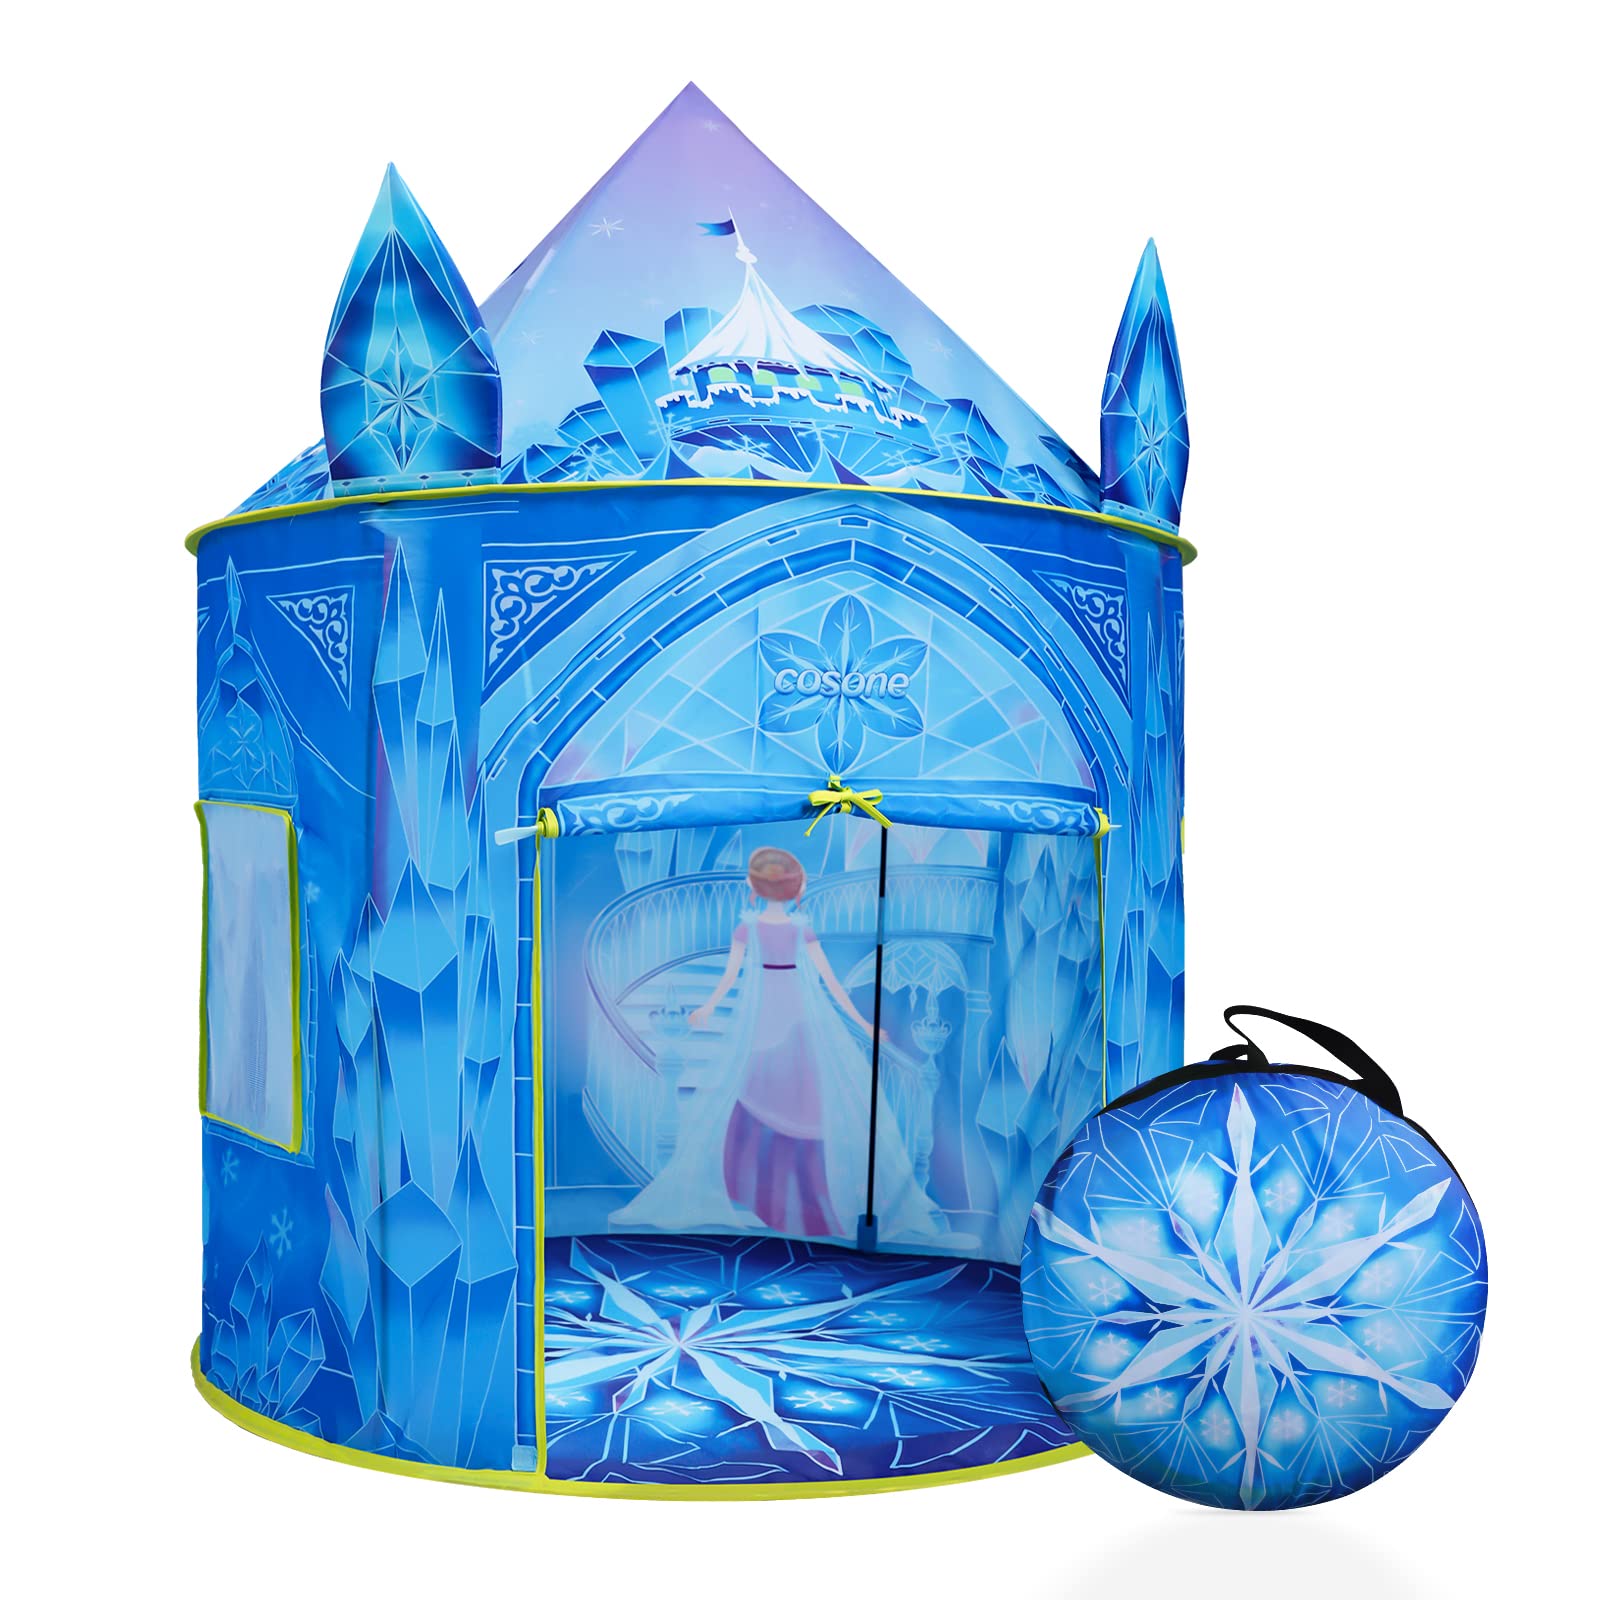 Cosone Kids Play Tent, Frozen Toy for Girls, Princess Castle Playhouses Indoor, Outdoor Princess Toys, Toddler Tent Birthday Gif